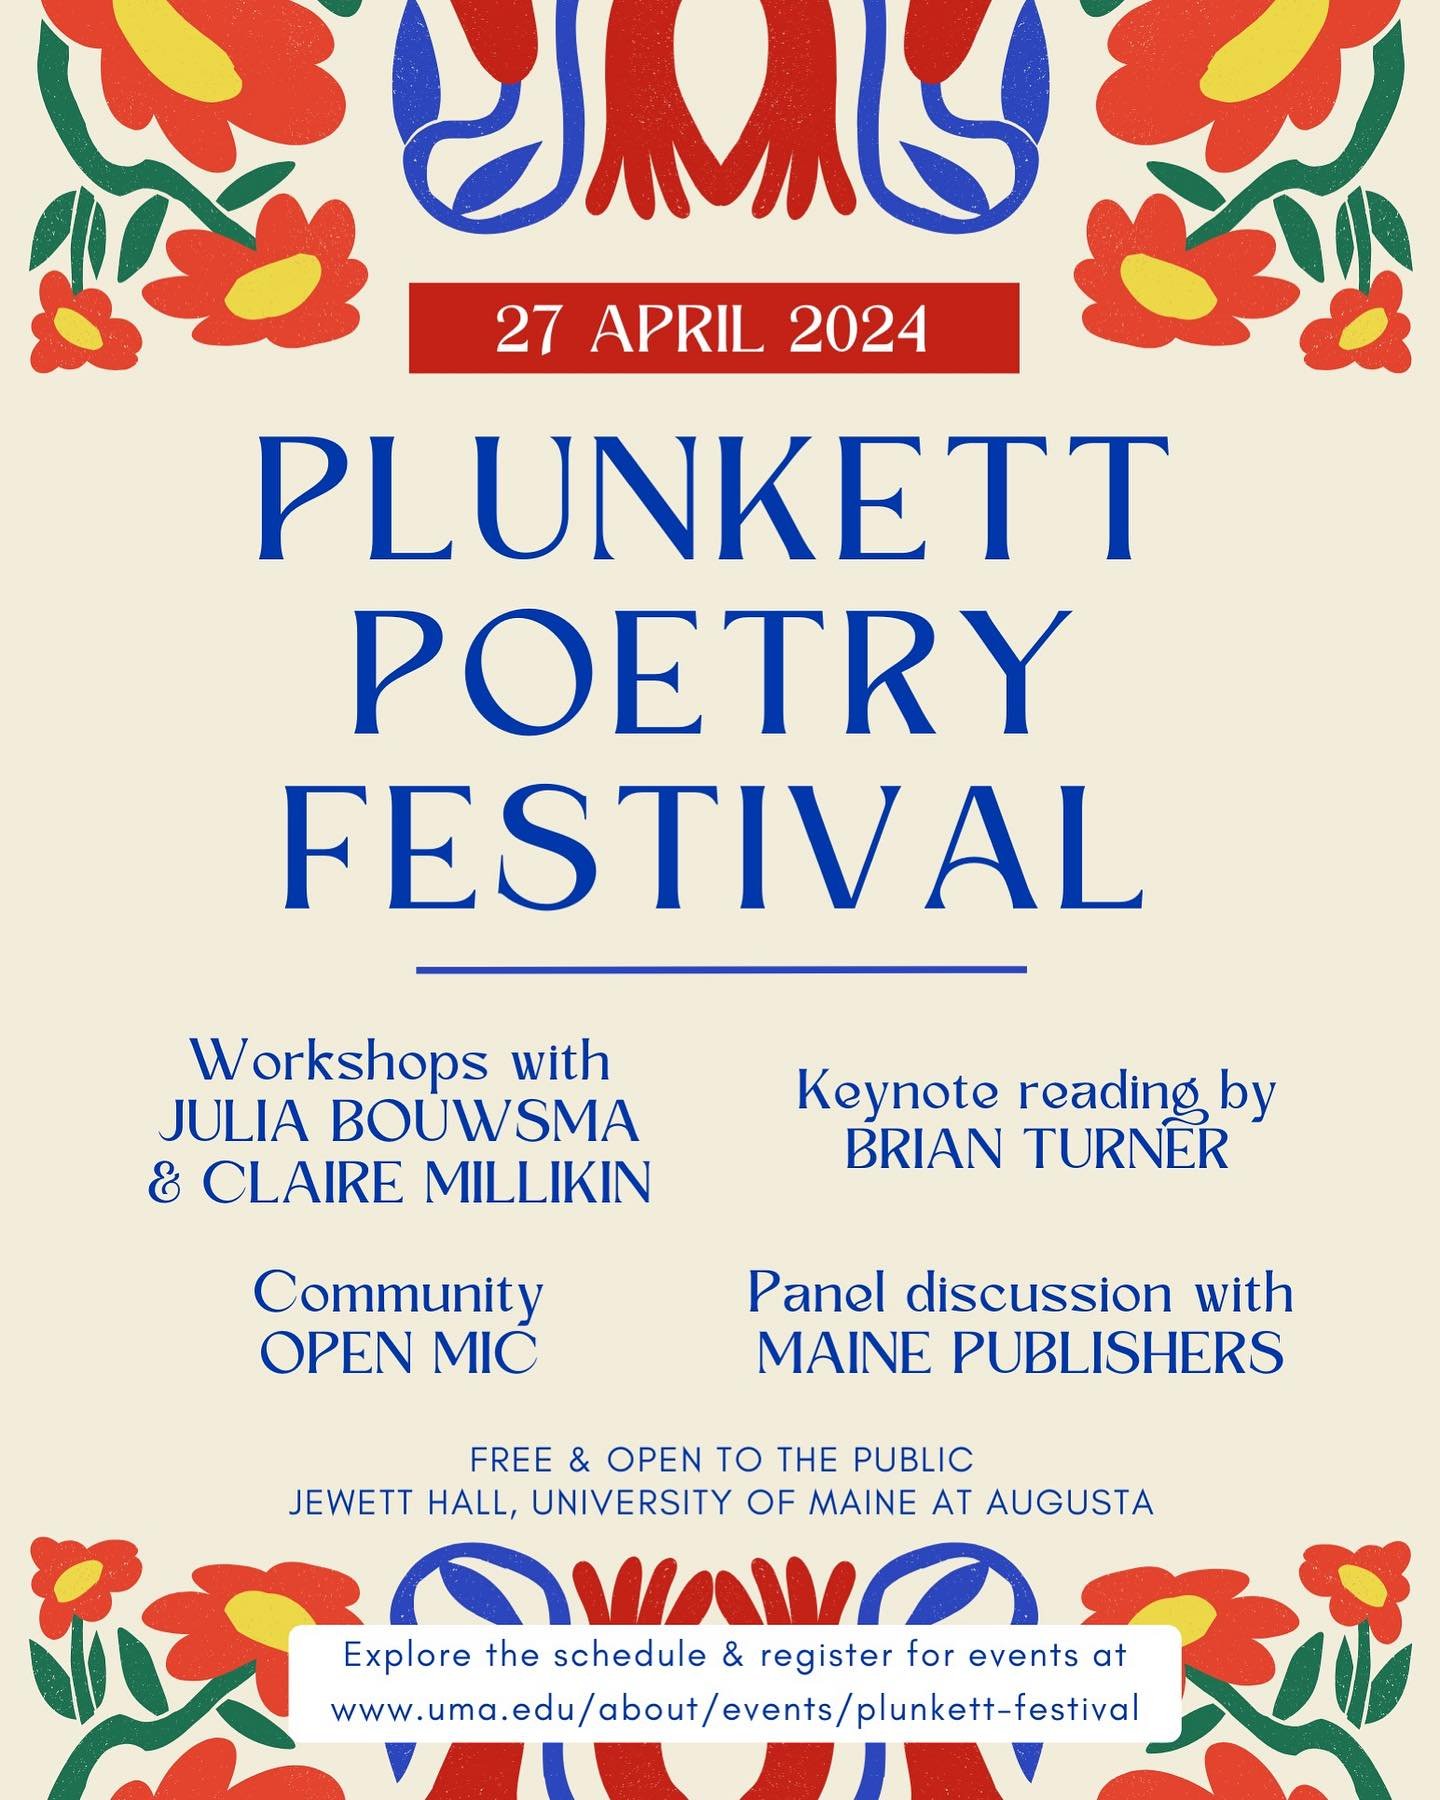 Coming this weekend! Our very own Design Director @lizkalloch will be part of a panel discussion with other Maine-based publishers at the Plunkett Poetry Festival, taking place at Jewett Hall at the University of Maine at August campus. Writing works